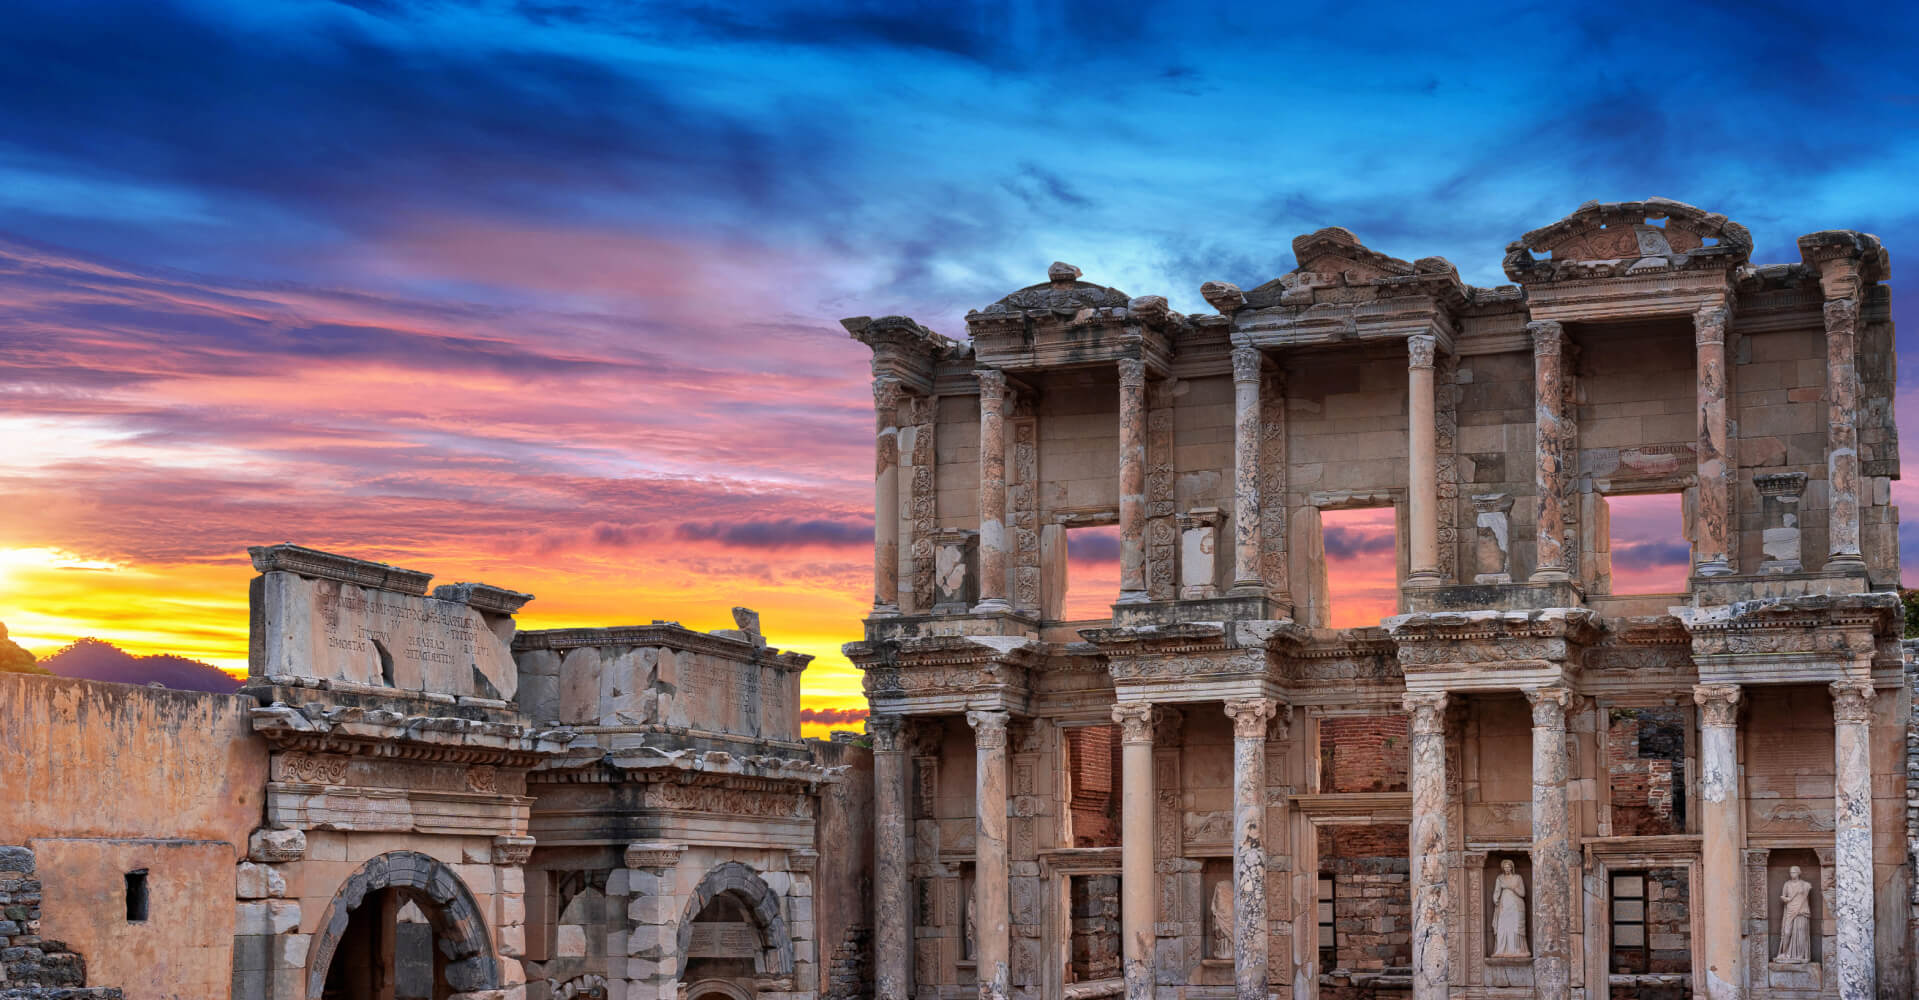 See Ephesus with the best guides!